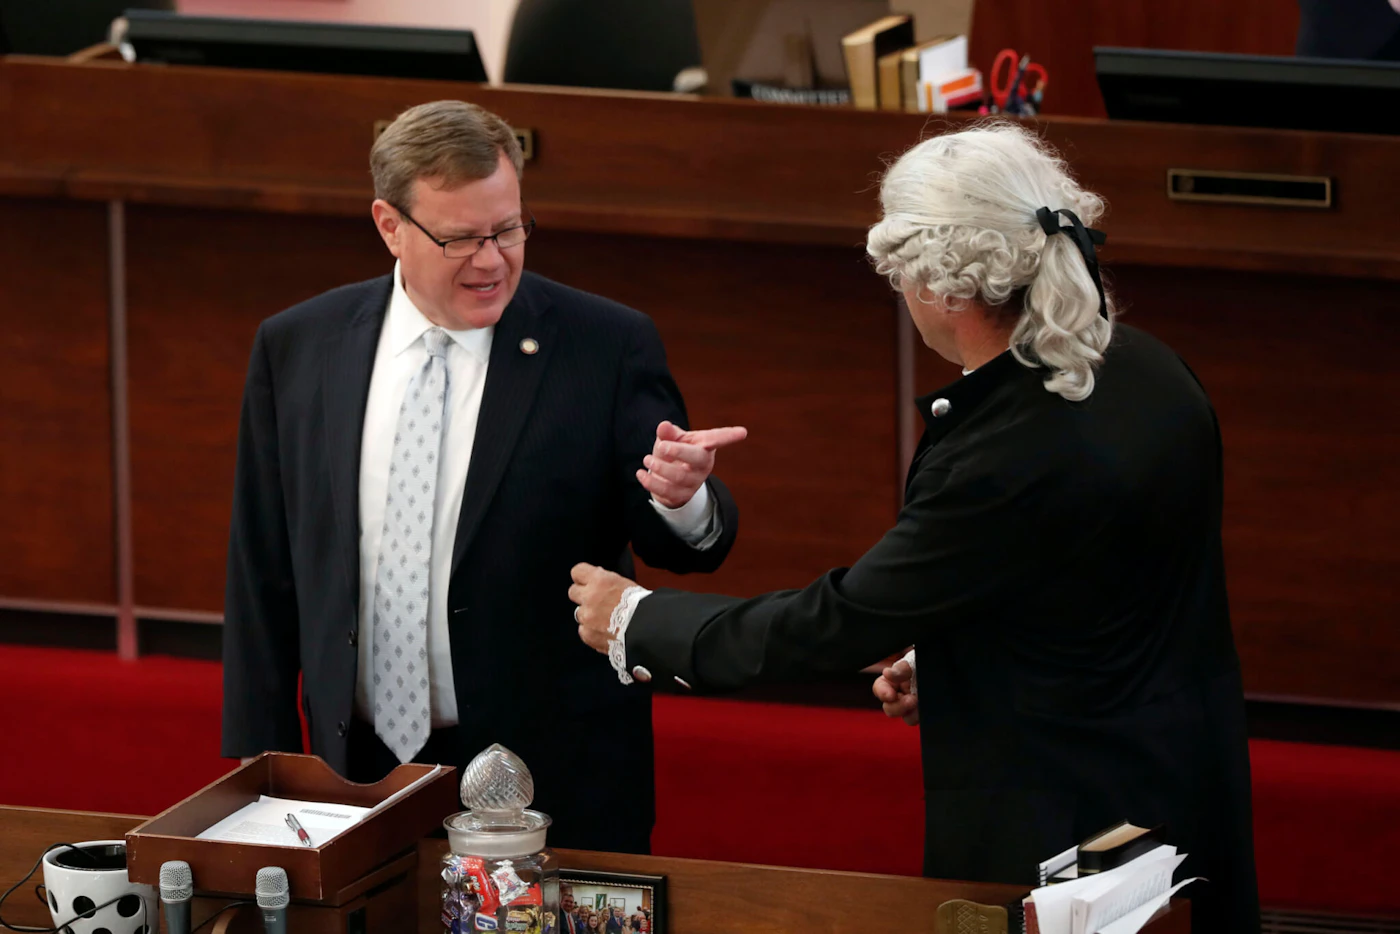 House Speaker Tim Moore, R-Cleveland, left, speaks with Rep. Michael Speciale, R-Craven, wearing colonial attire, in this April file photo. Lawmakers like Speciale have framed coronavirus as a debate over constitutional liberties. (AP Photo/Gerry Broome)